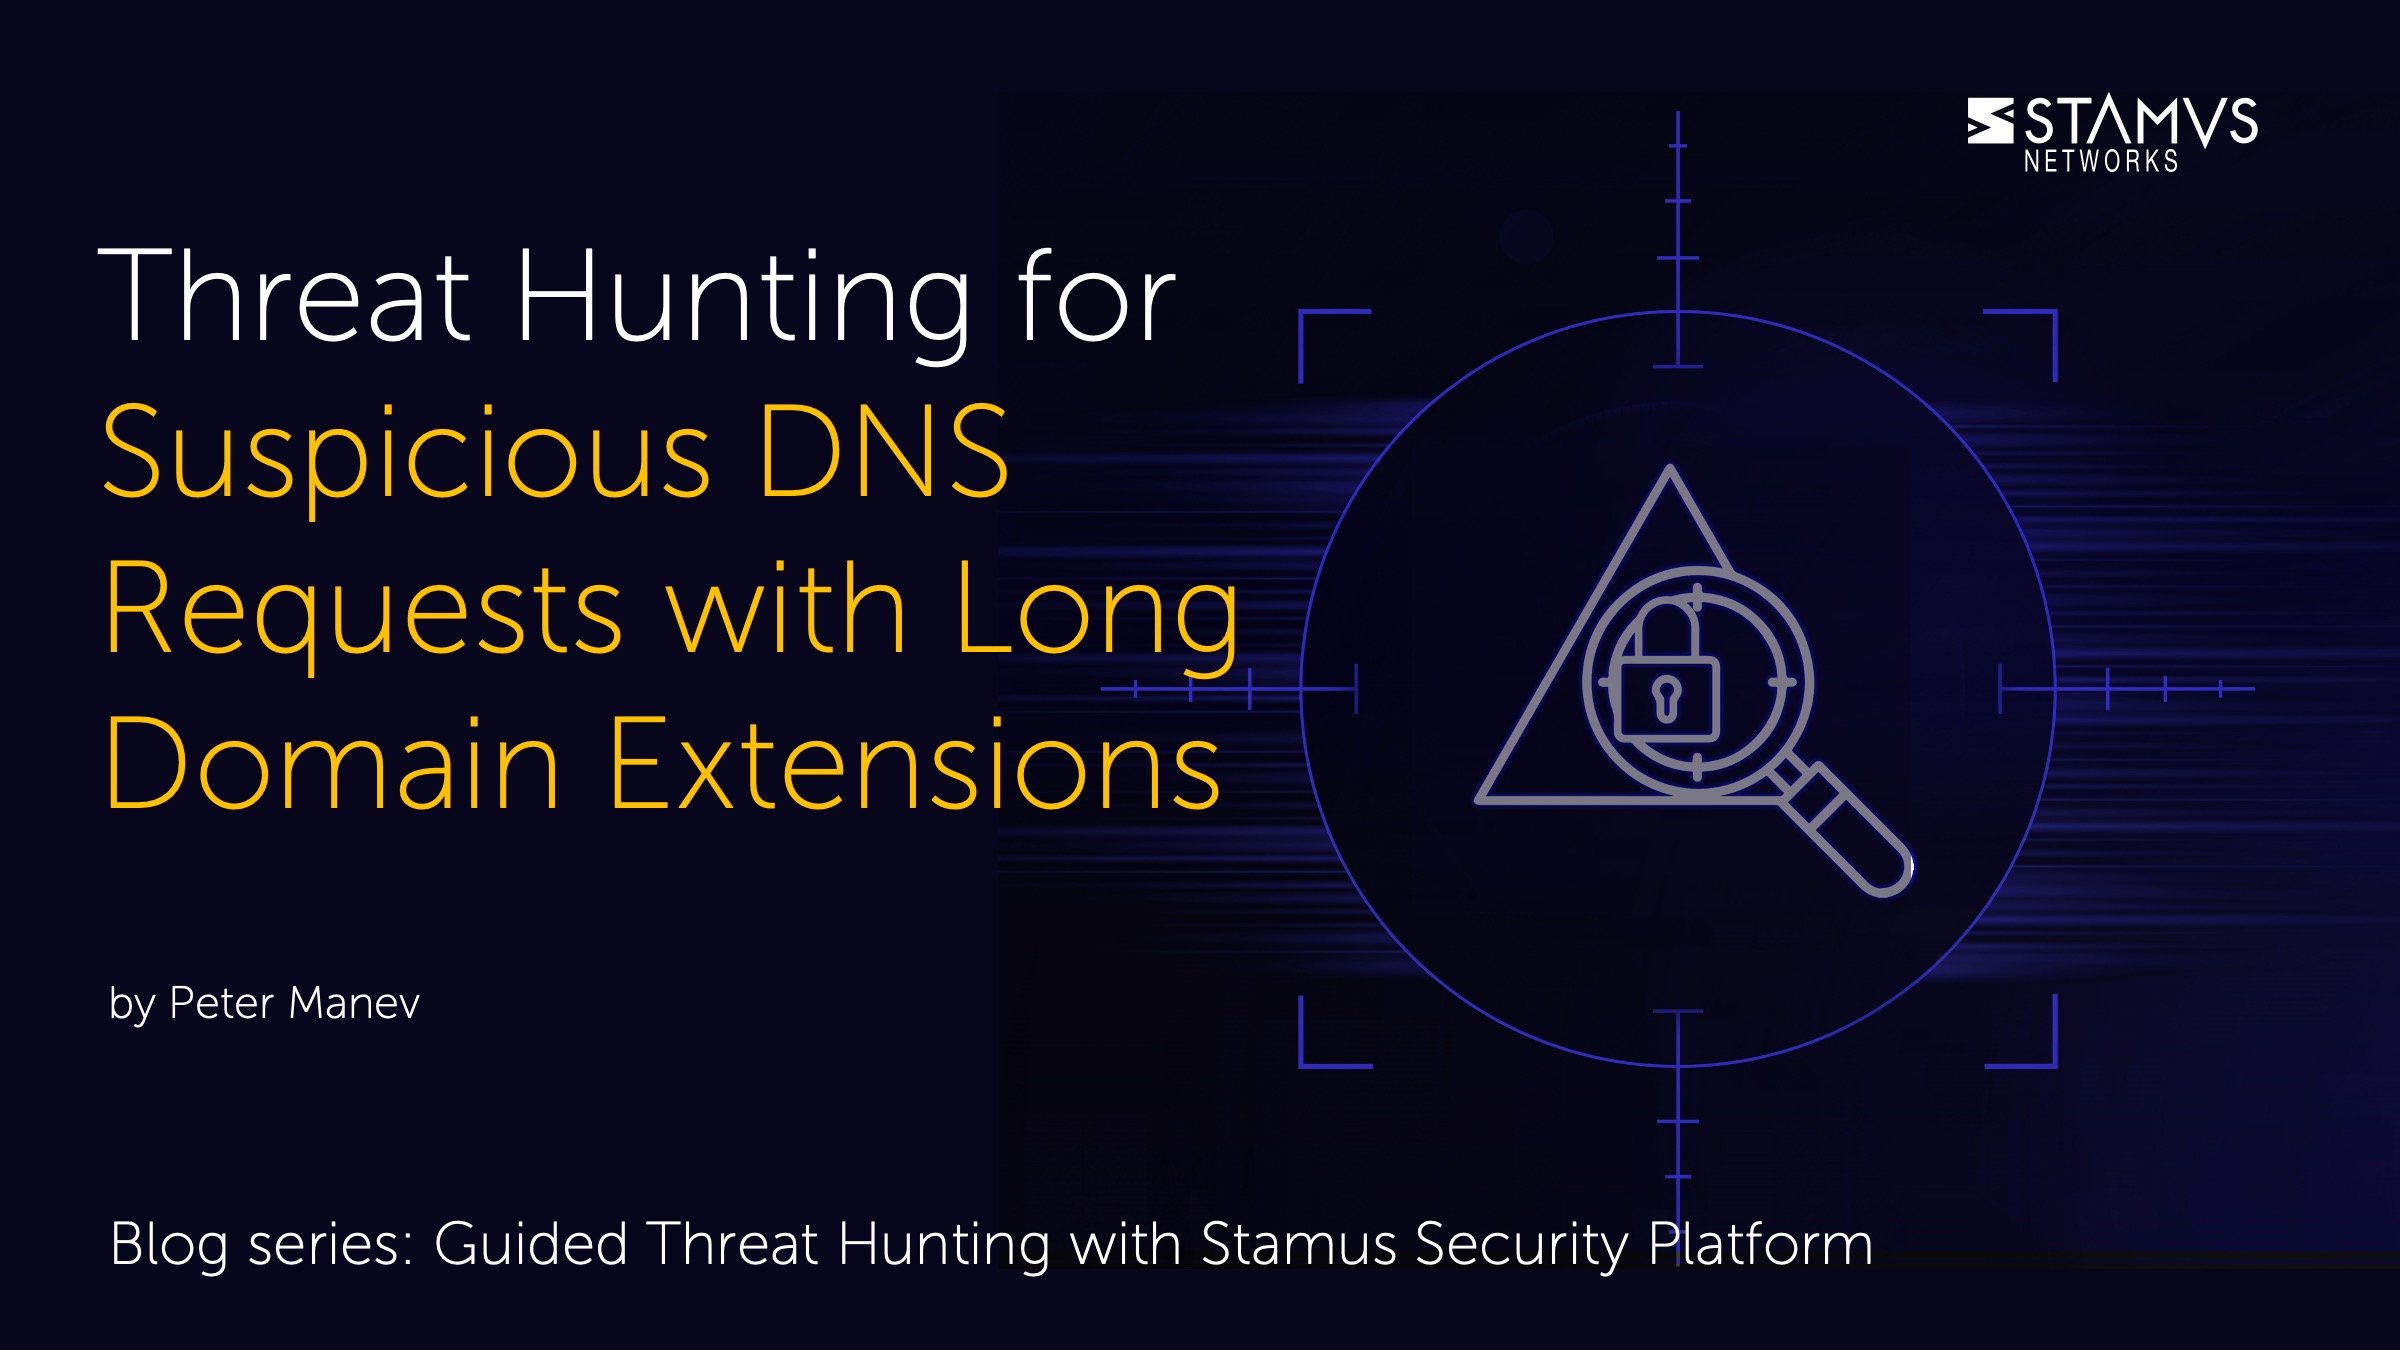 Threat Hunting for Suspicious DNS Requests with Long Domain Extensions by Peter Manev